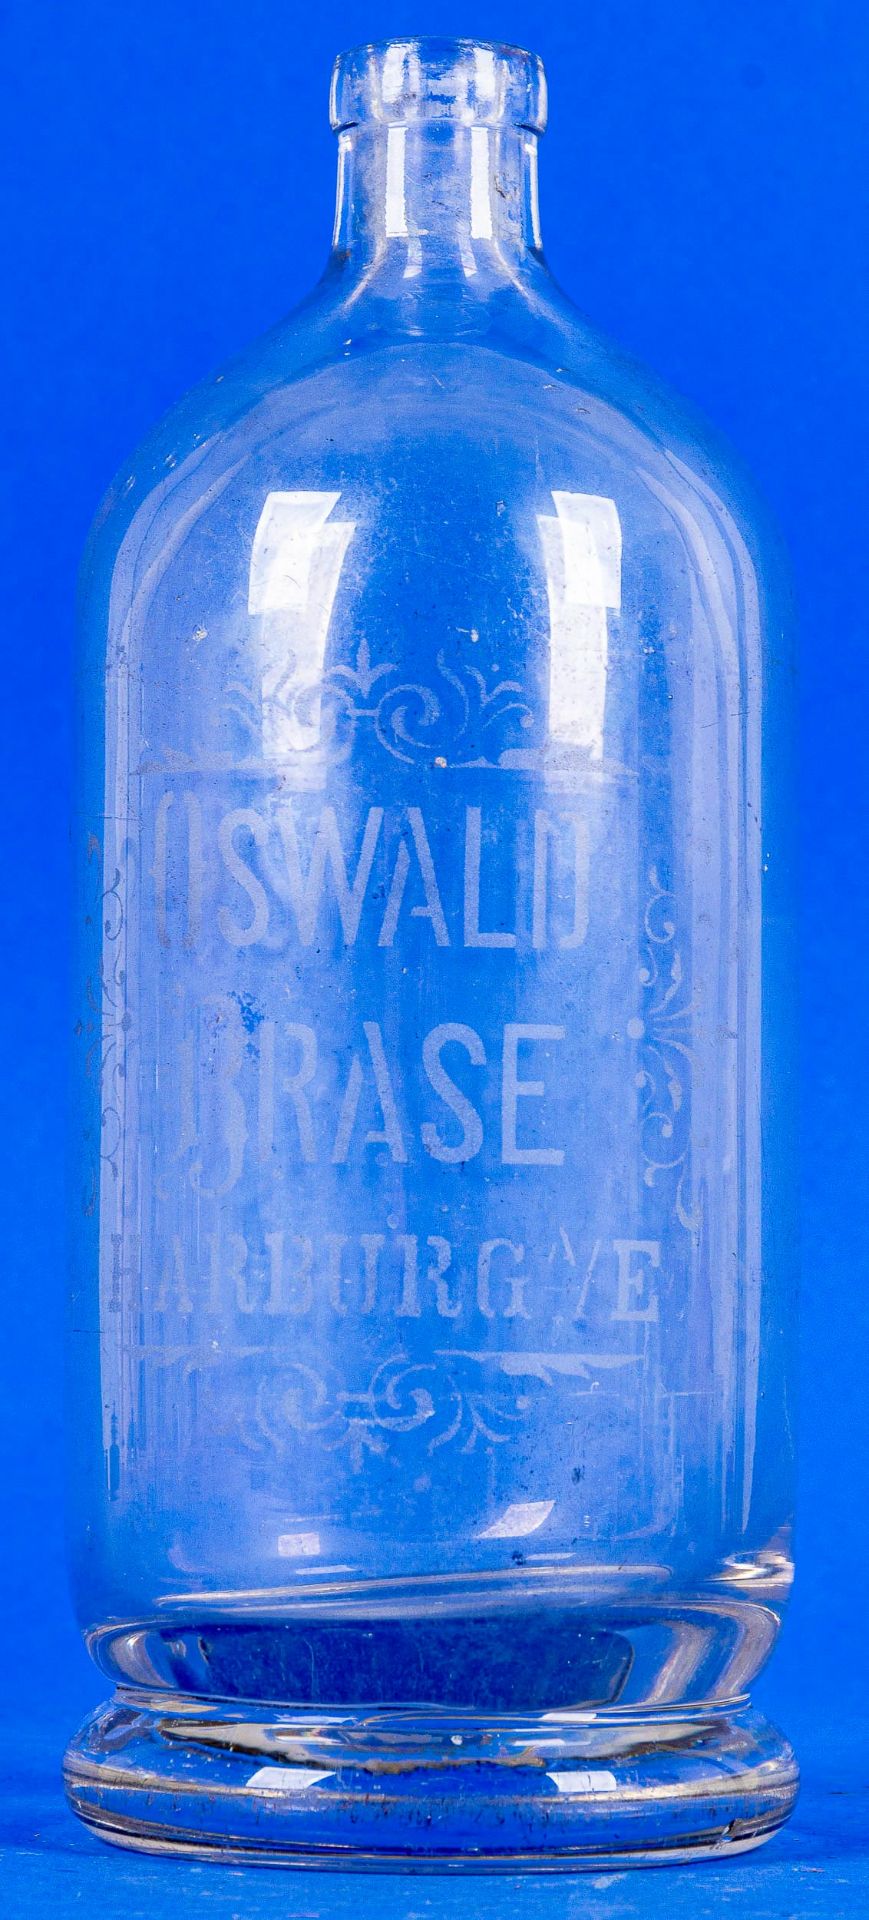 Antike Glasflasche, farbloses, dickwandiges Glas, frontal bez.: Oswald Brase Harburg a./E. Höhe ca. - Image 4 of 4